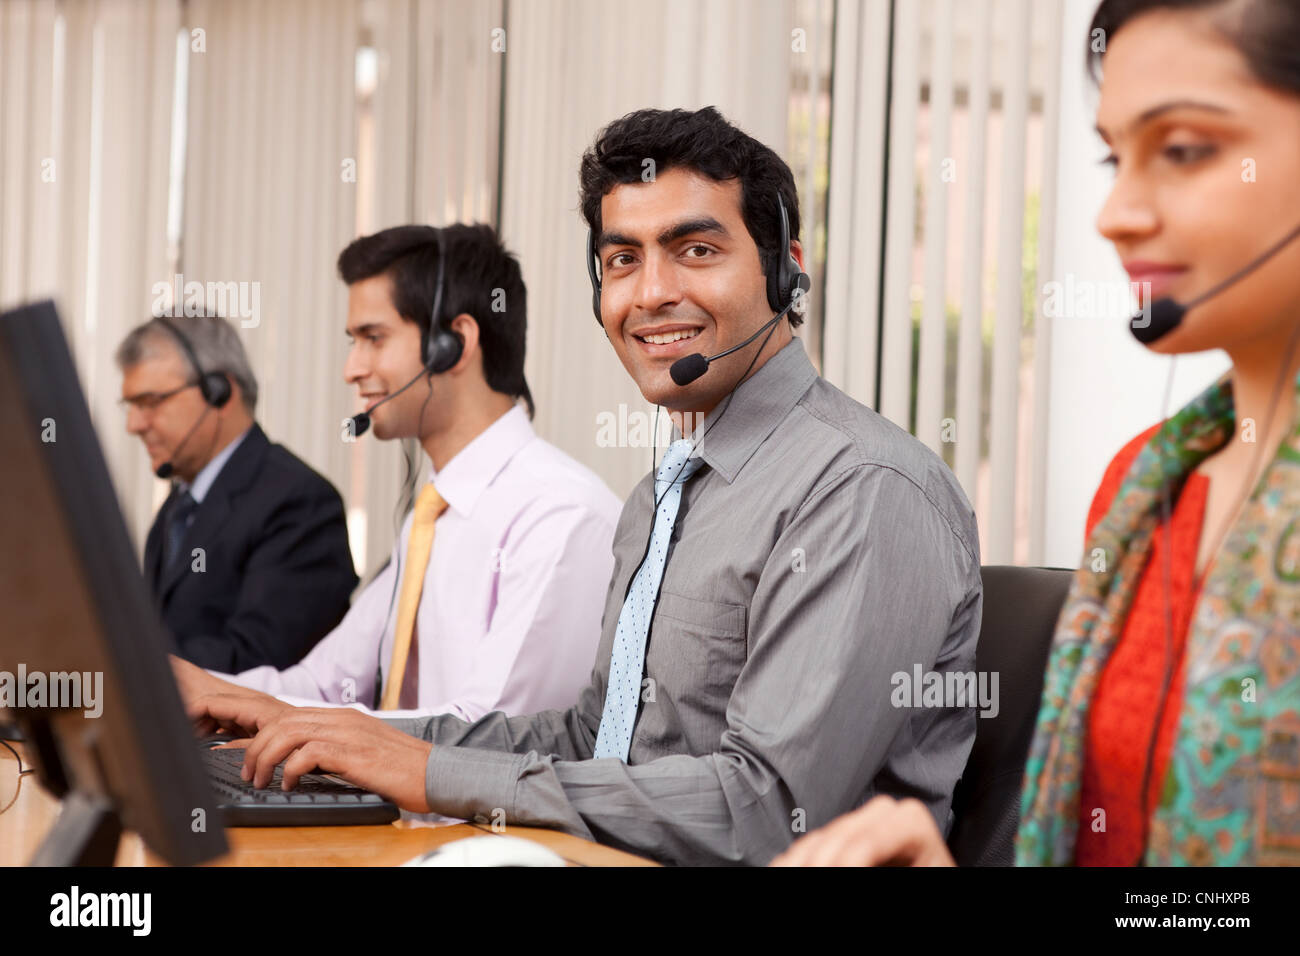 Portrait of a call center agent Stock Photo